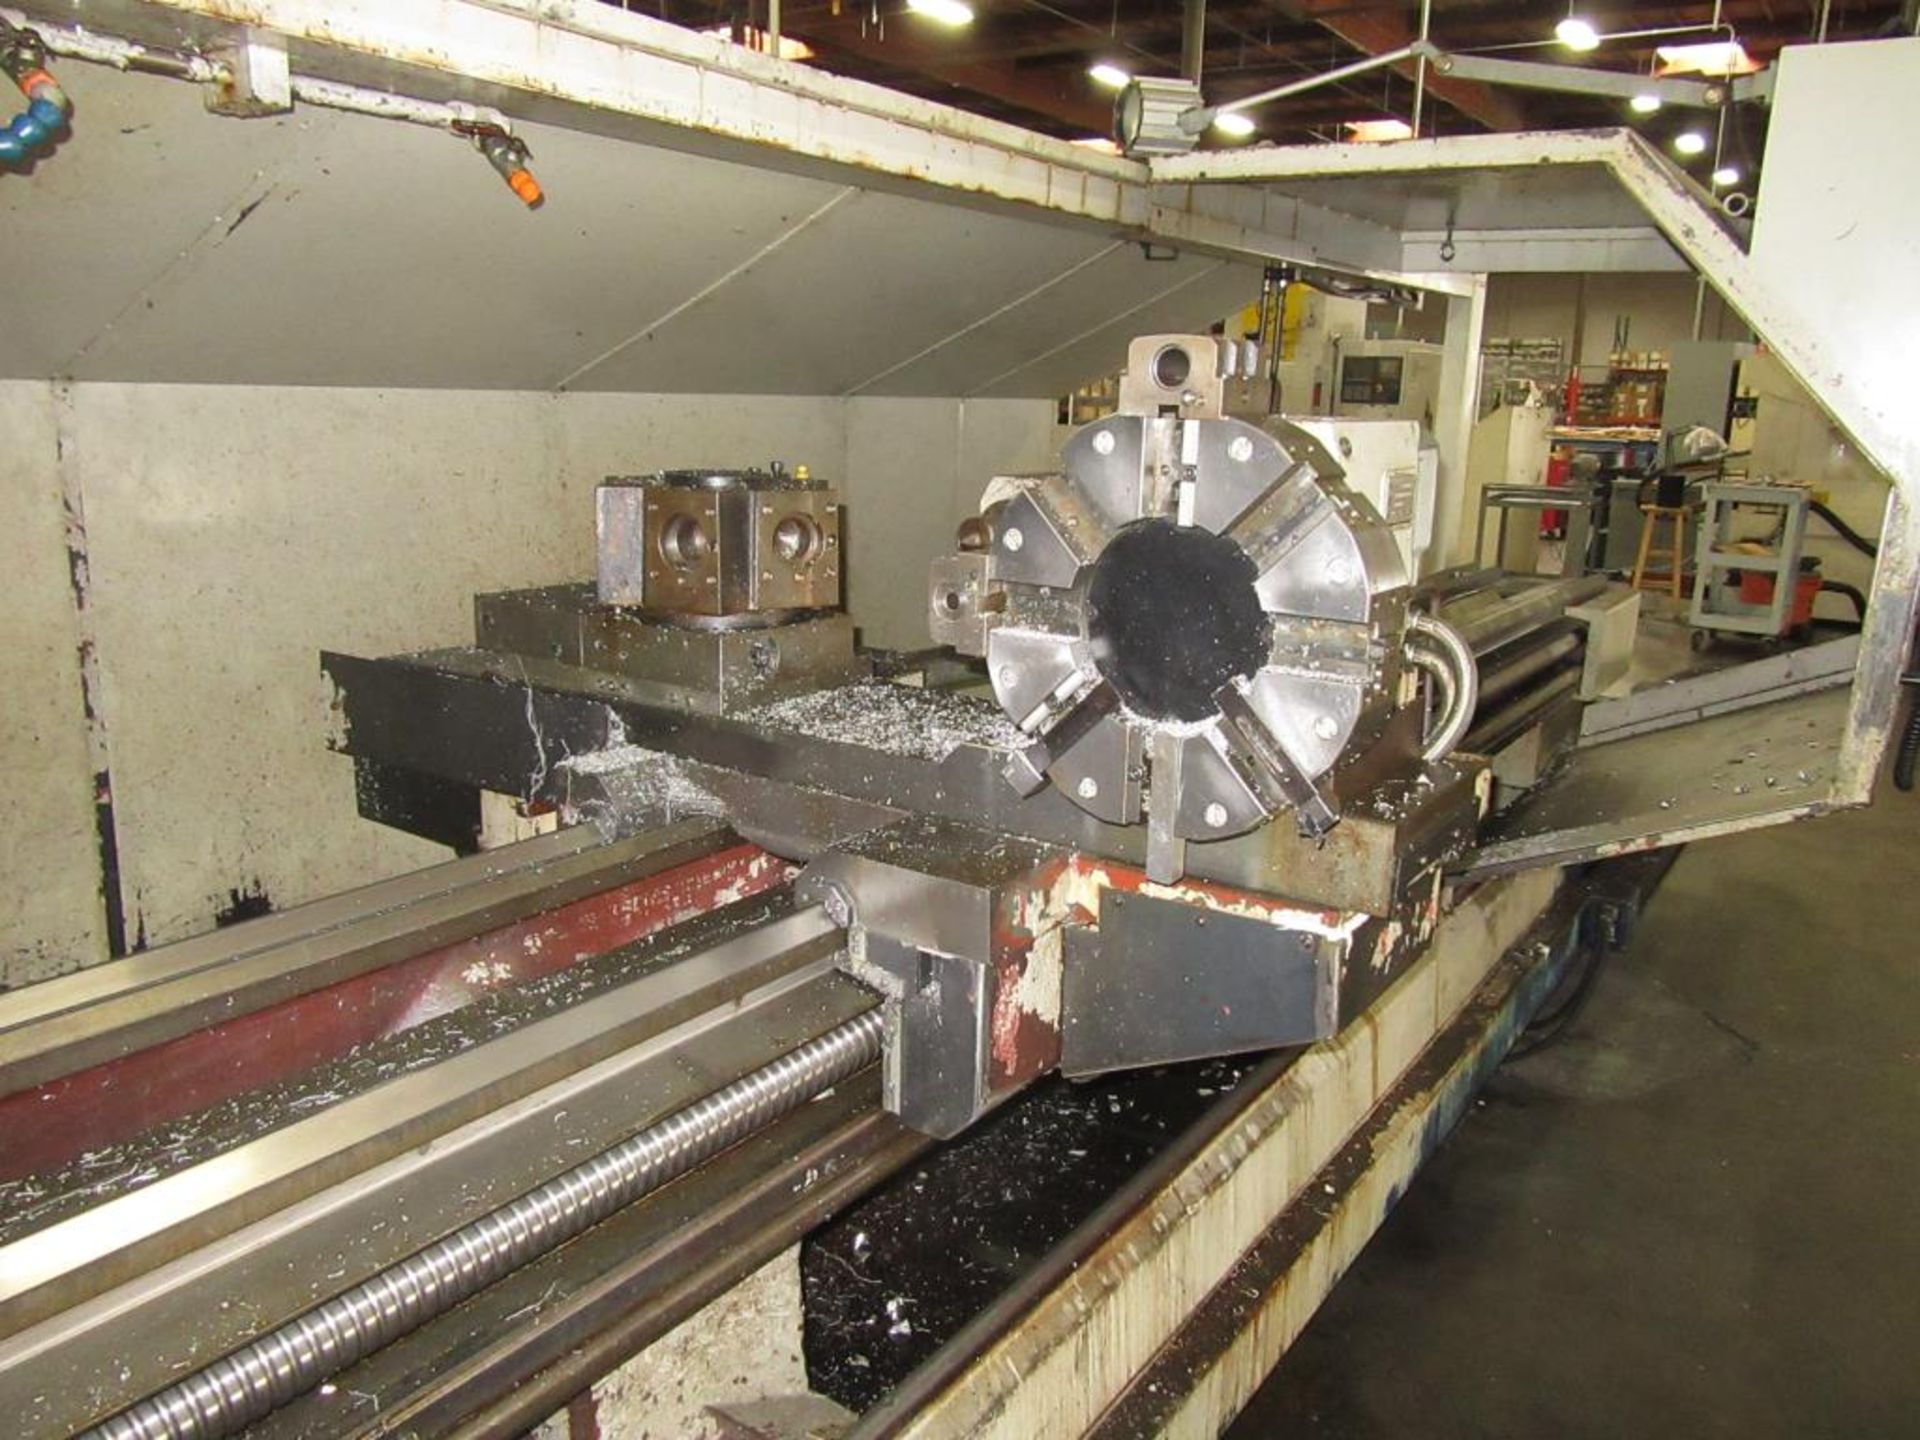 Mighty Viper / Chin Hung T-6 / CL-38-2000. 1999 - CNC Lathe with Fanuc Series O-T 2-Axis Control - Image 9 of 26